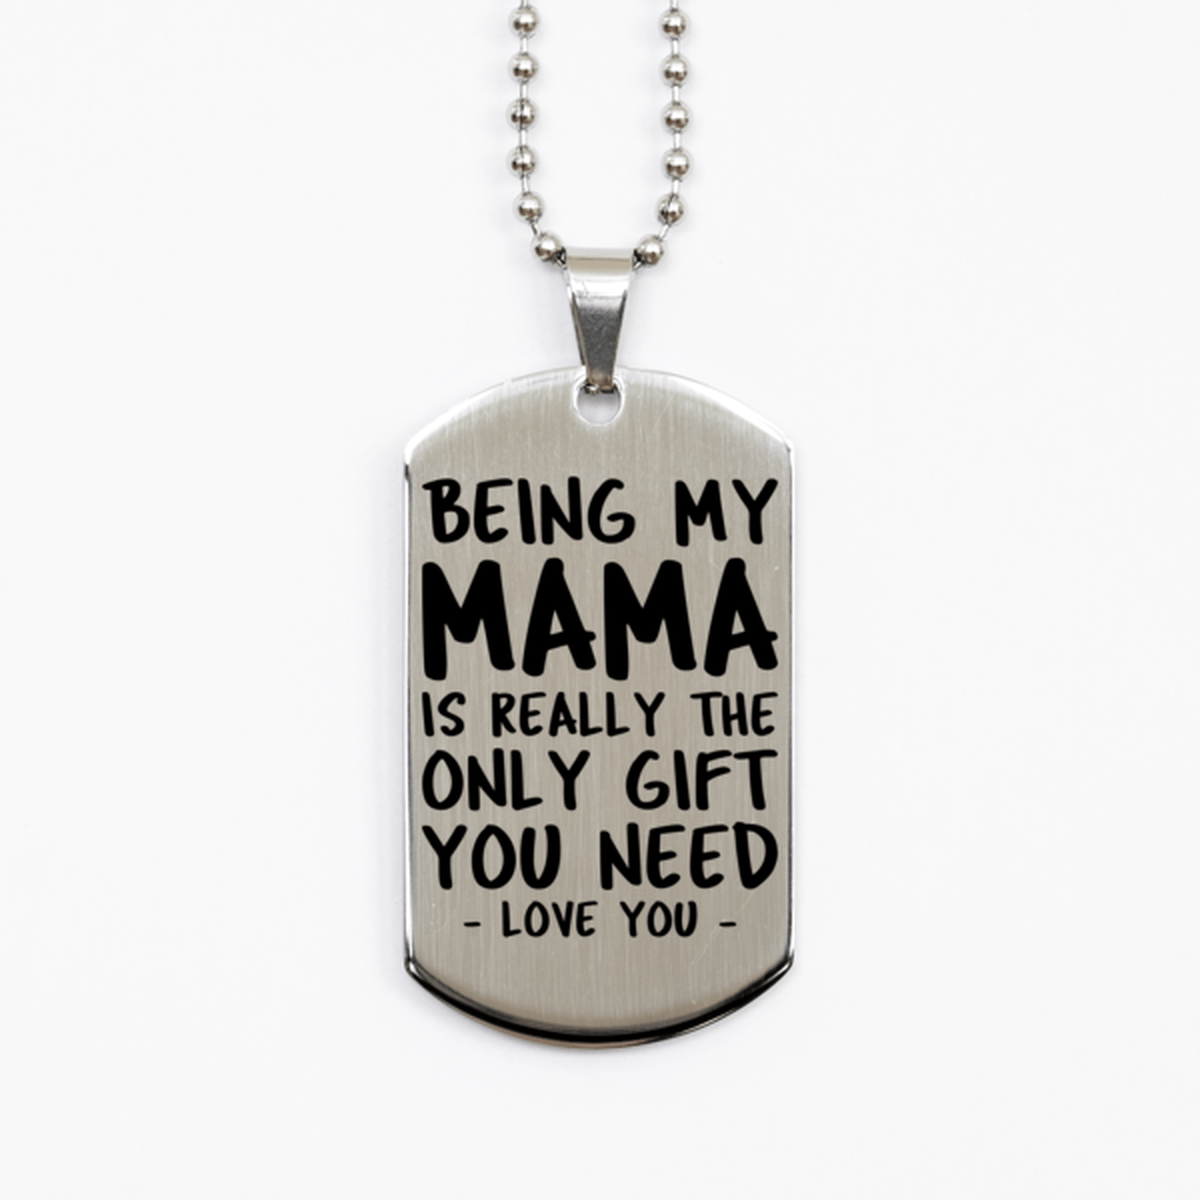 Funny Mama Silver Dog Tag Necklace, Being My Mama Is Really the Only Gift You Need, Best Birthday Gifts for Mama